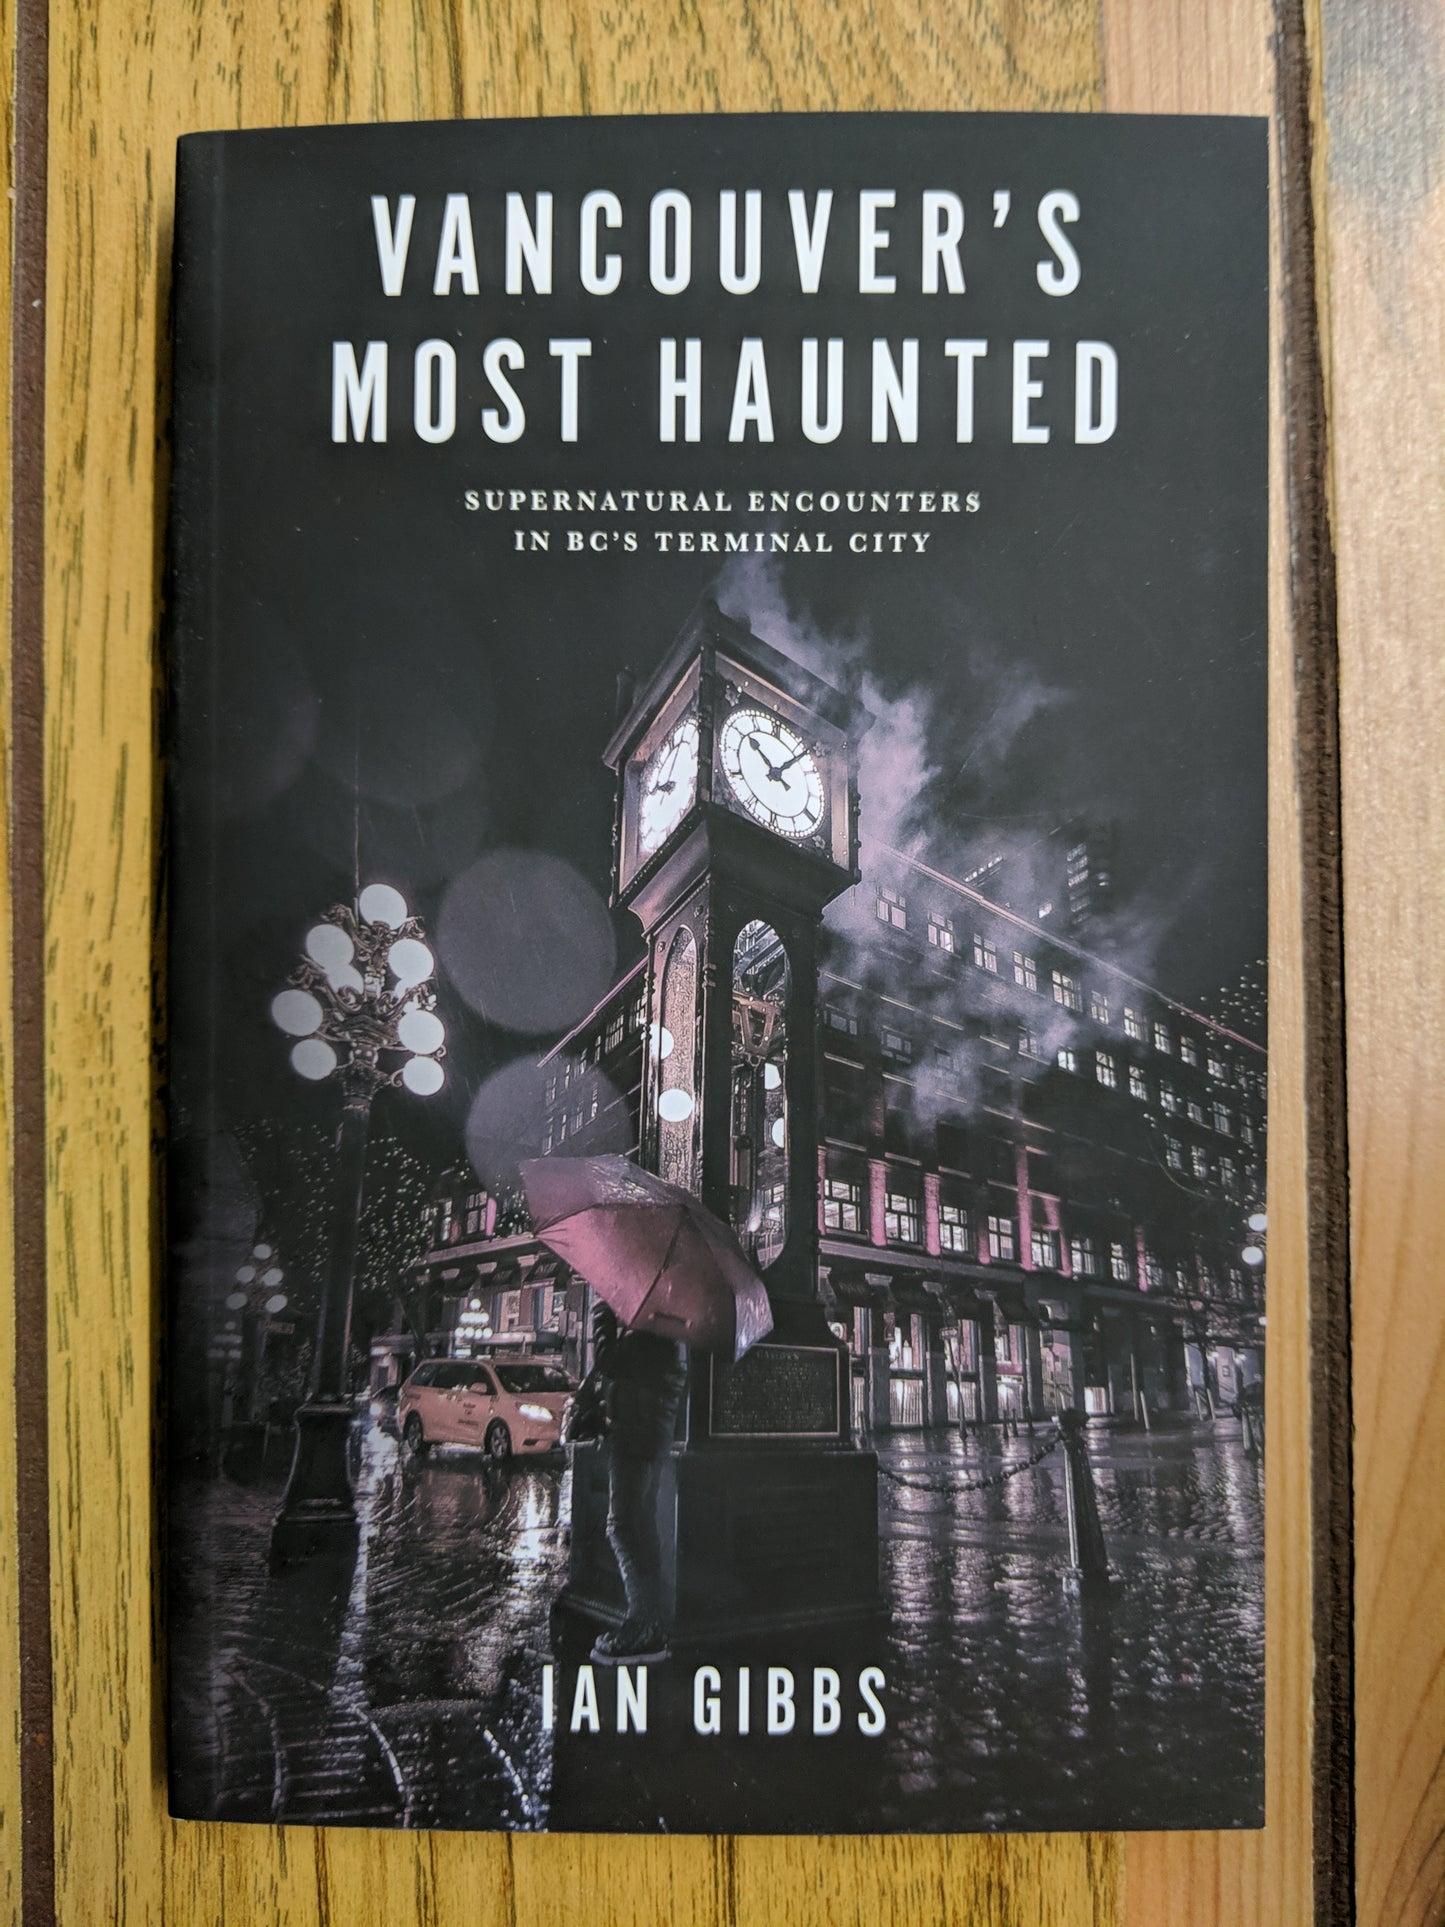 Vancouver's Most Haunted